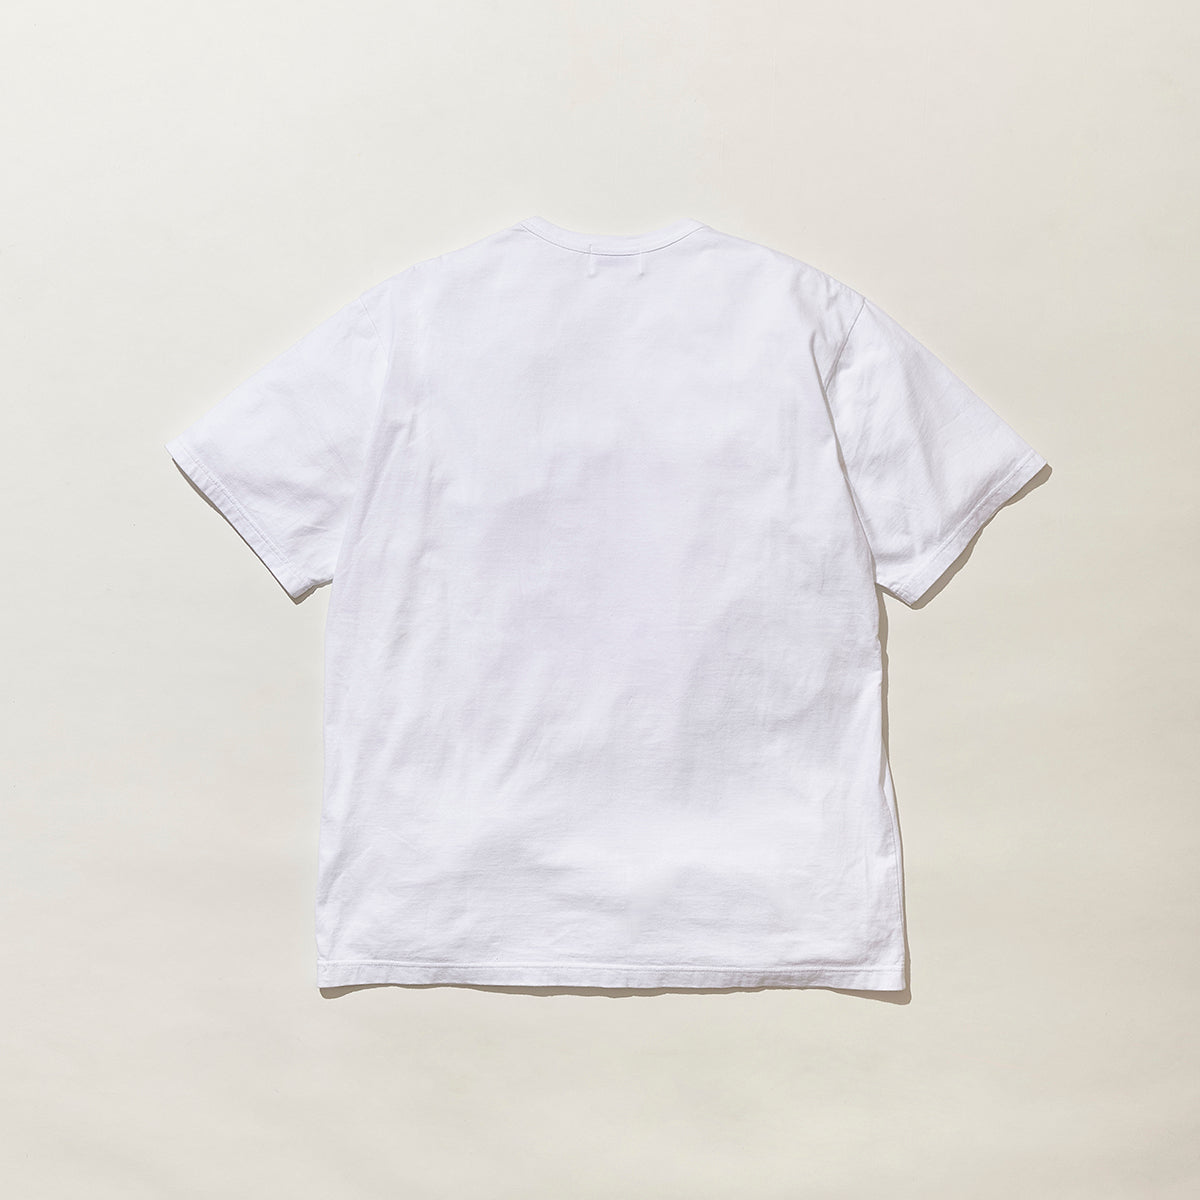 BORO Patched Tee